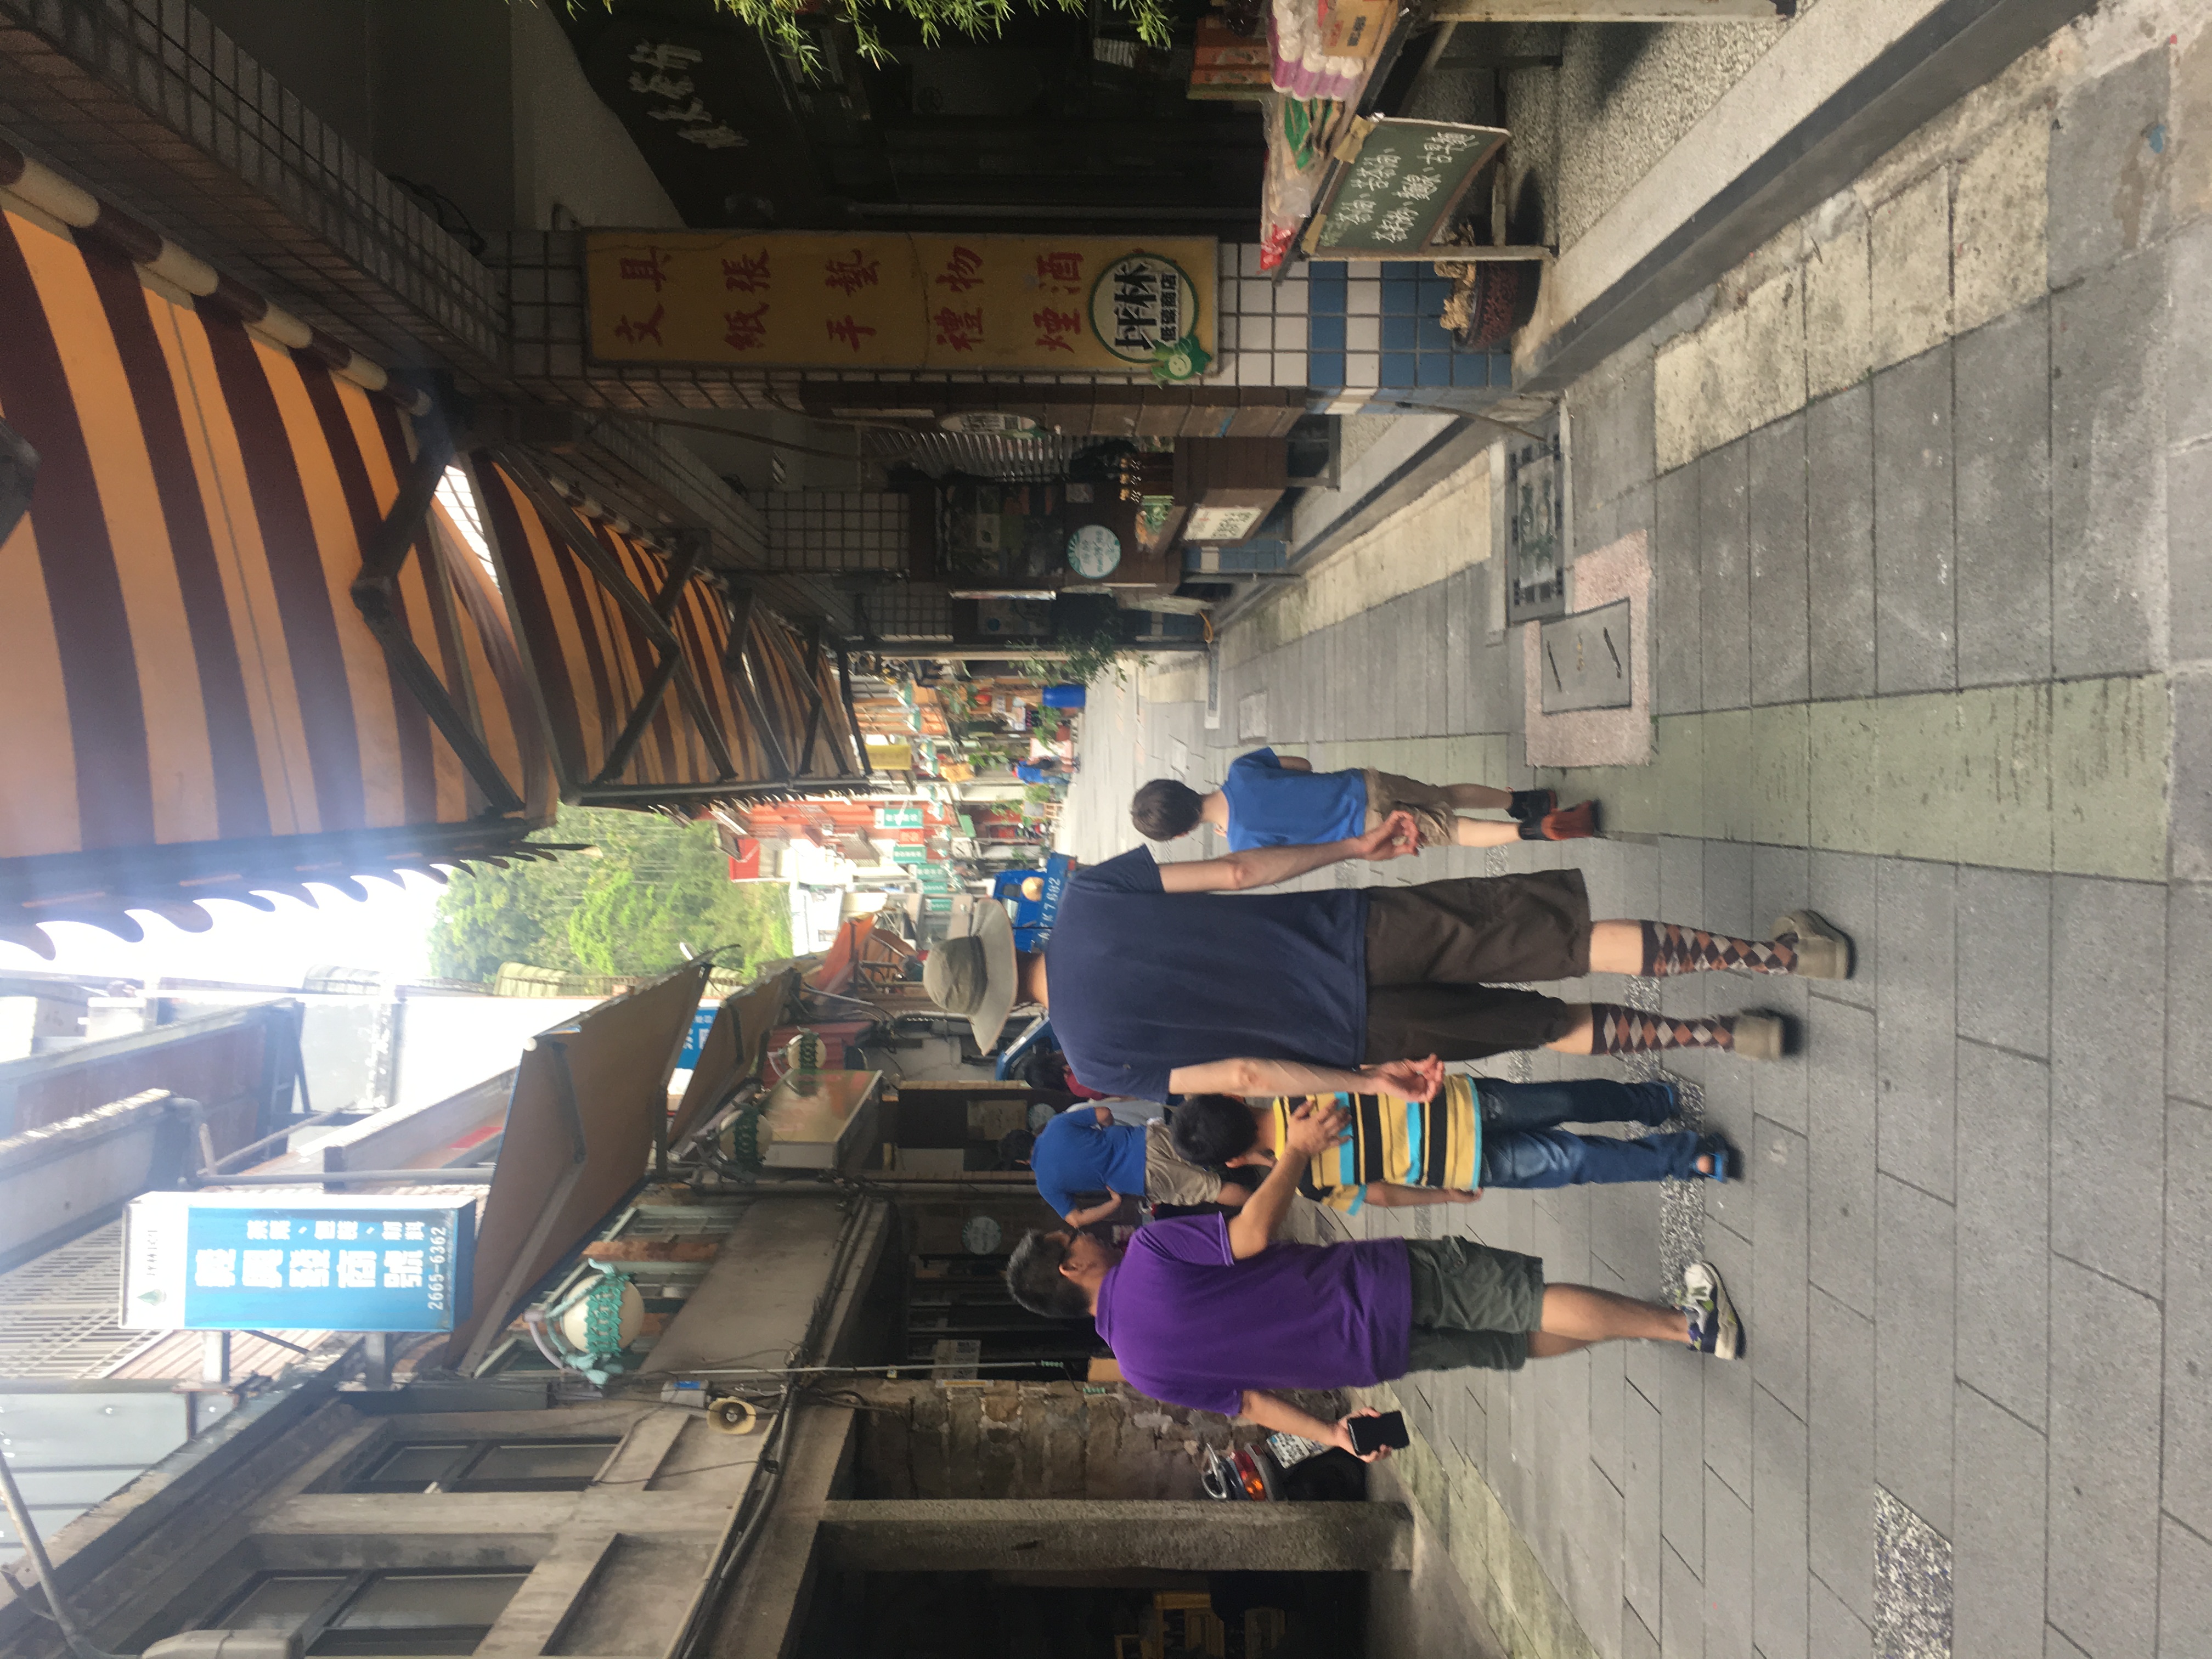 Four people walking through a narrow alleyway with small shops on either side.